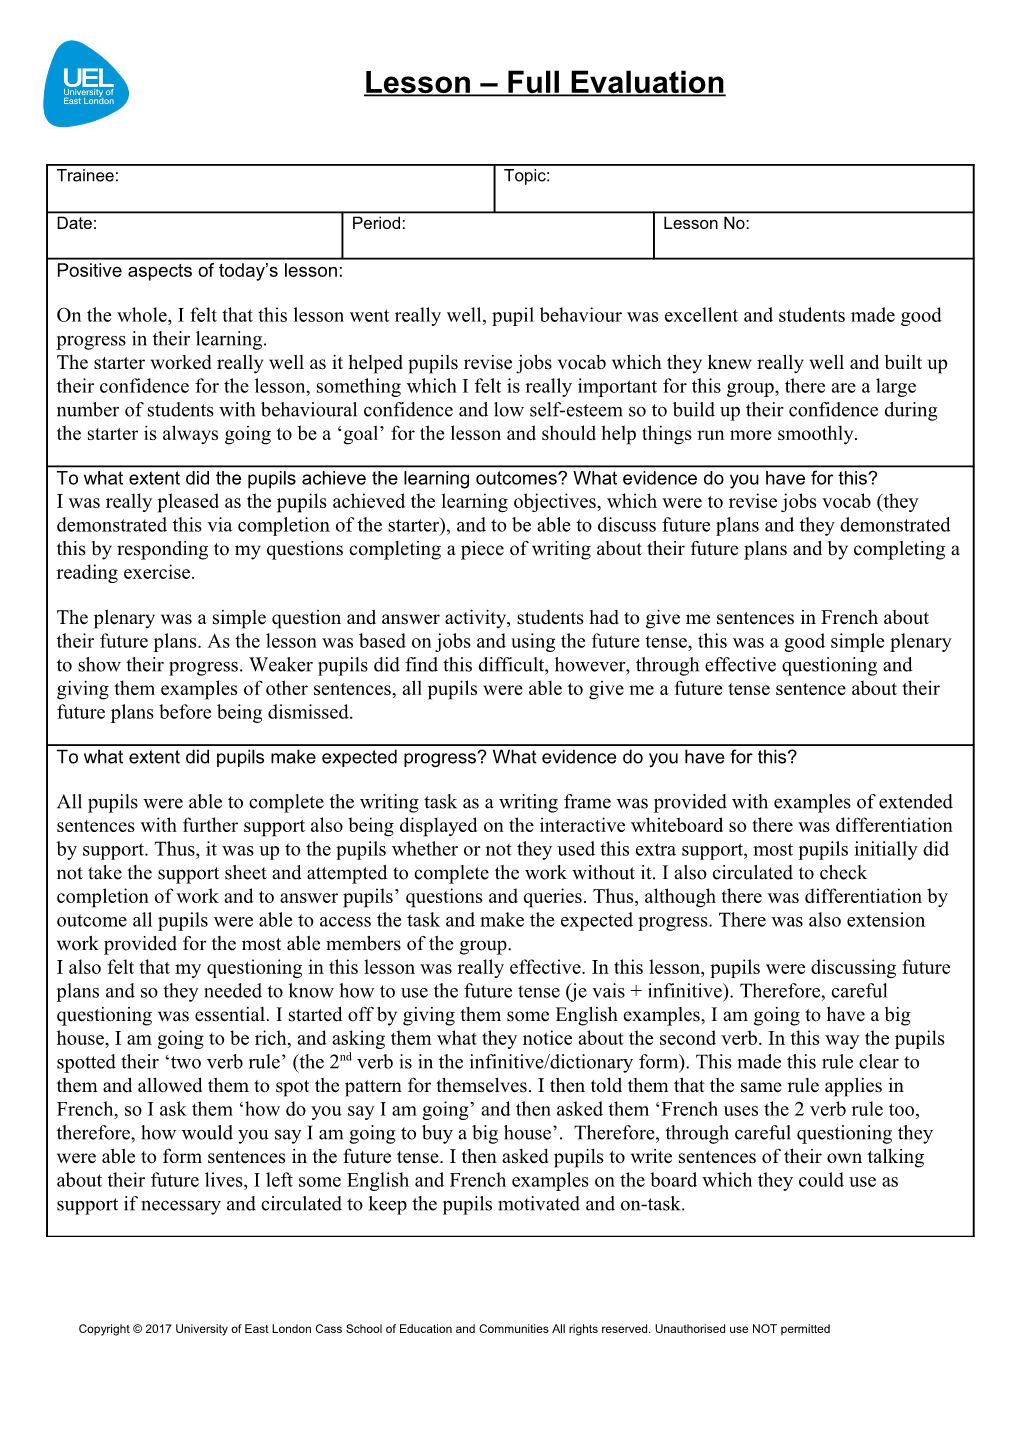 Physical Education Lesson Plan Full Evaluation